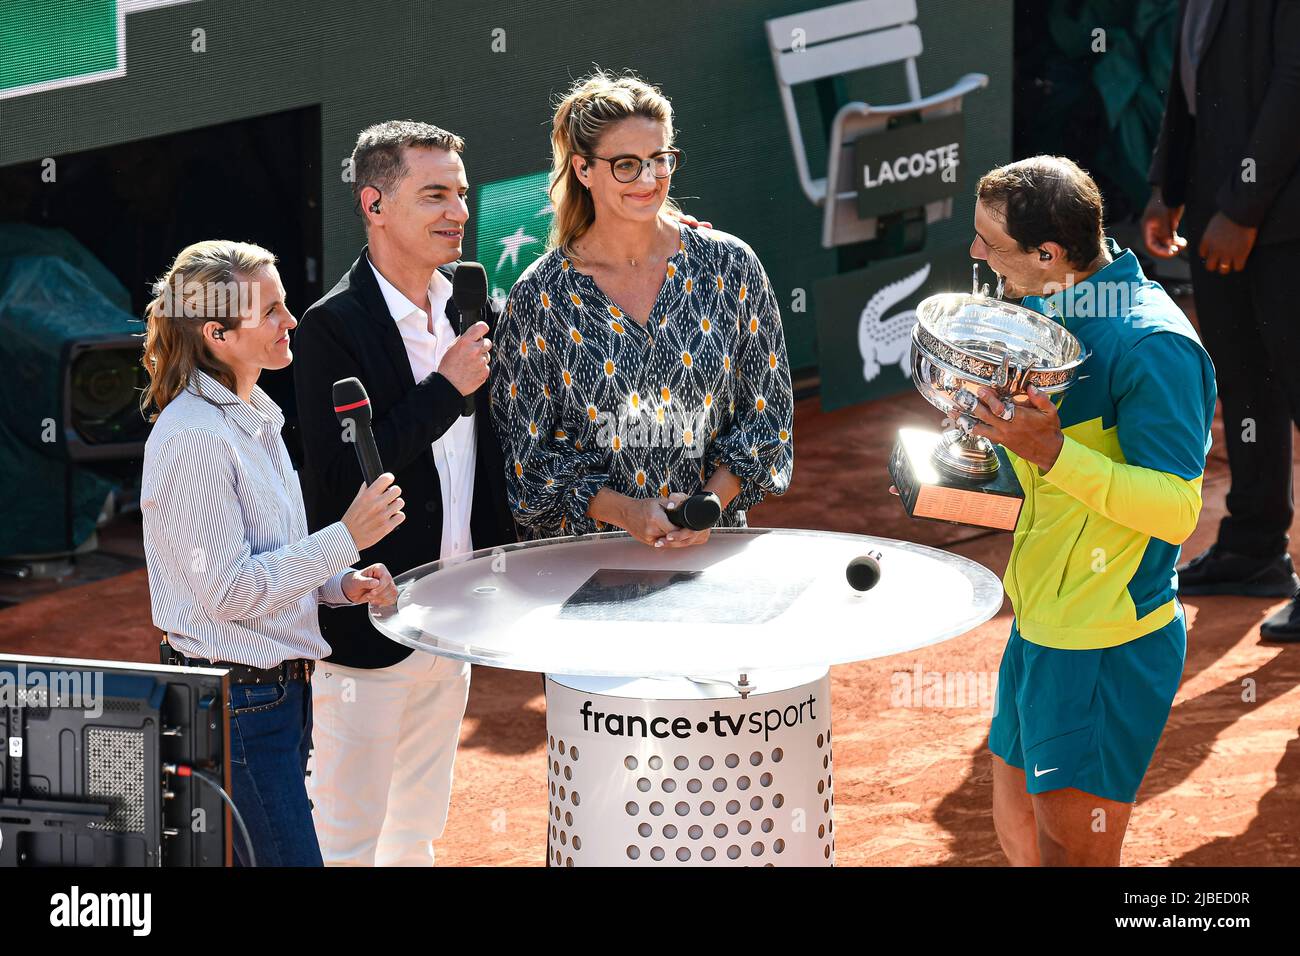 Paris, France - 05/06/2022, Rafael 'Rafa' Nadal of Spain with the trophy is interviewed by the French television channel 'France Televisions' ('France TV Sport', 'France 2') with Justine Henin, Laurent Luyat and Mary Pierce after the French Open final against Casper Ruud, Grand Slam tennis tournament on June 5, 2022 at Roland-Garros stadium in Paris, France - Photo Victor Joly / DPPI Stock Photo